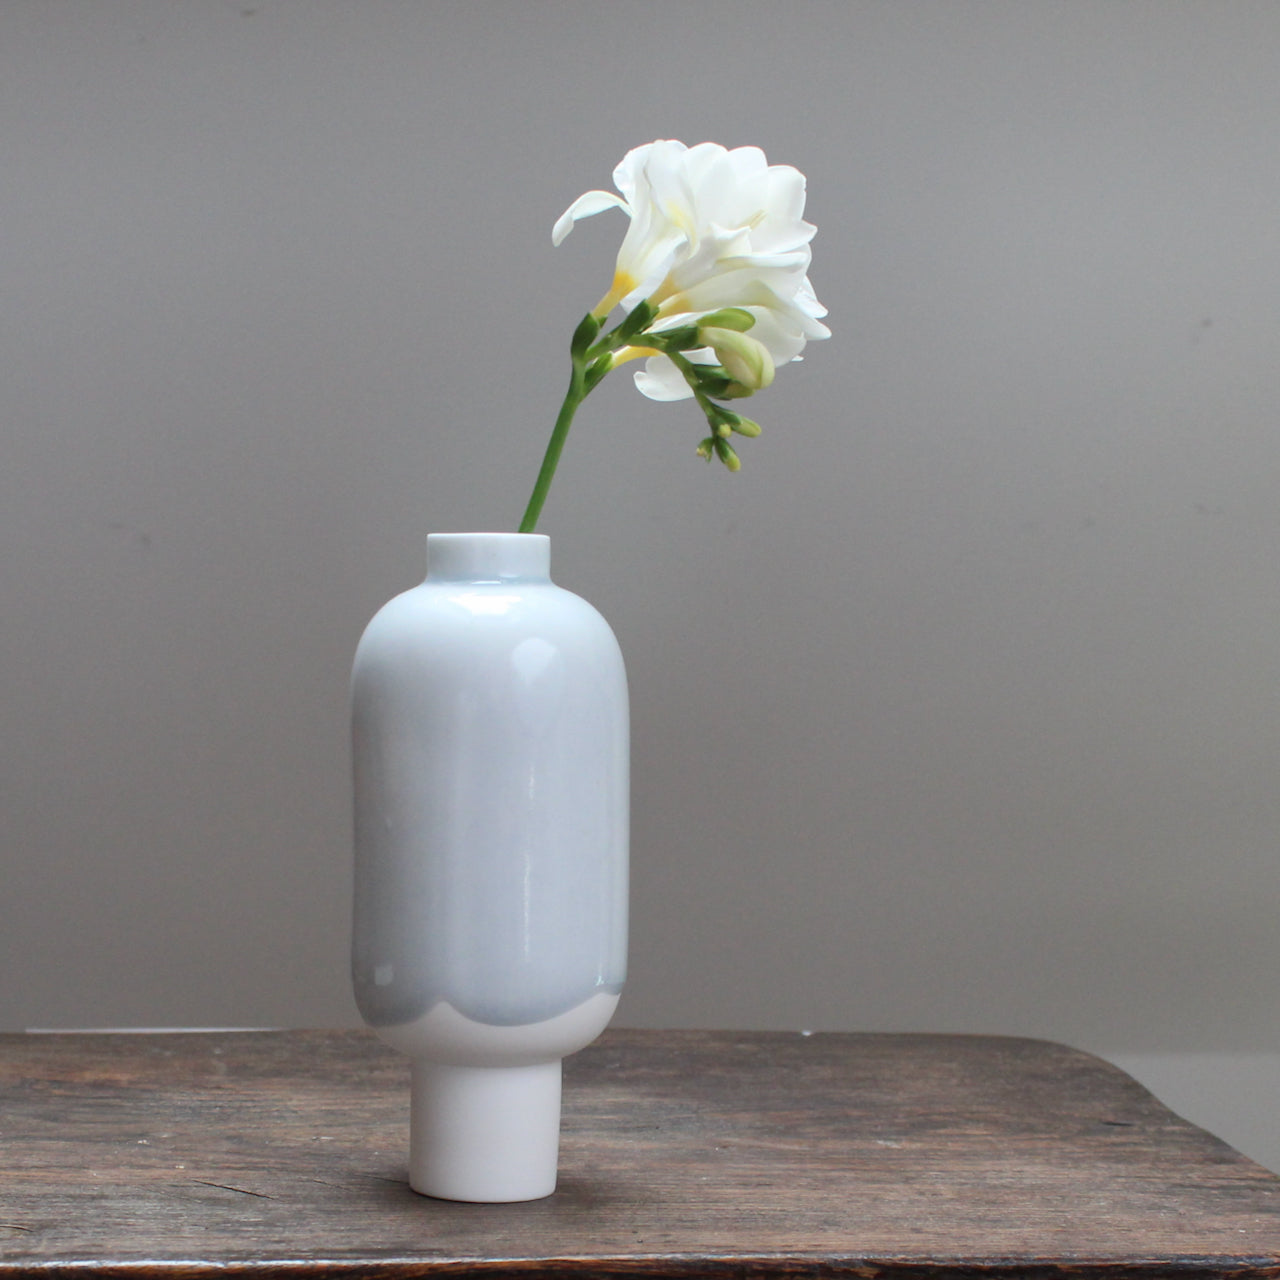 Small pale blue and white ceramic vessel with a single white freesia stem in it standing on a wooden table 